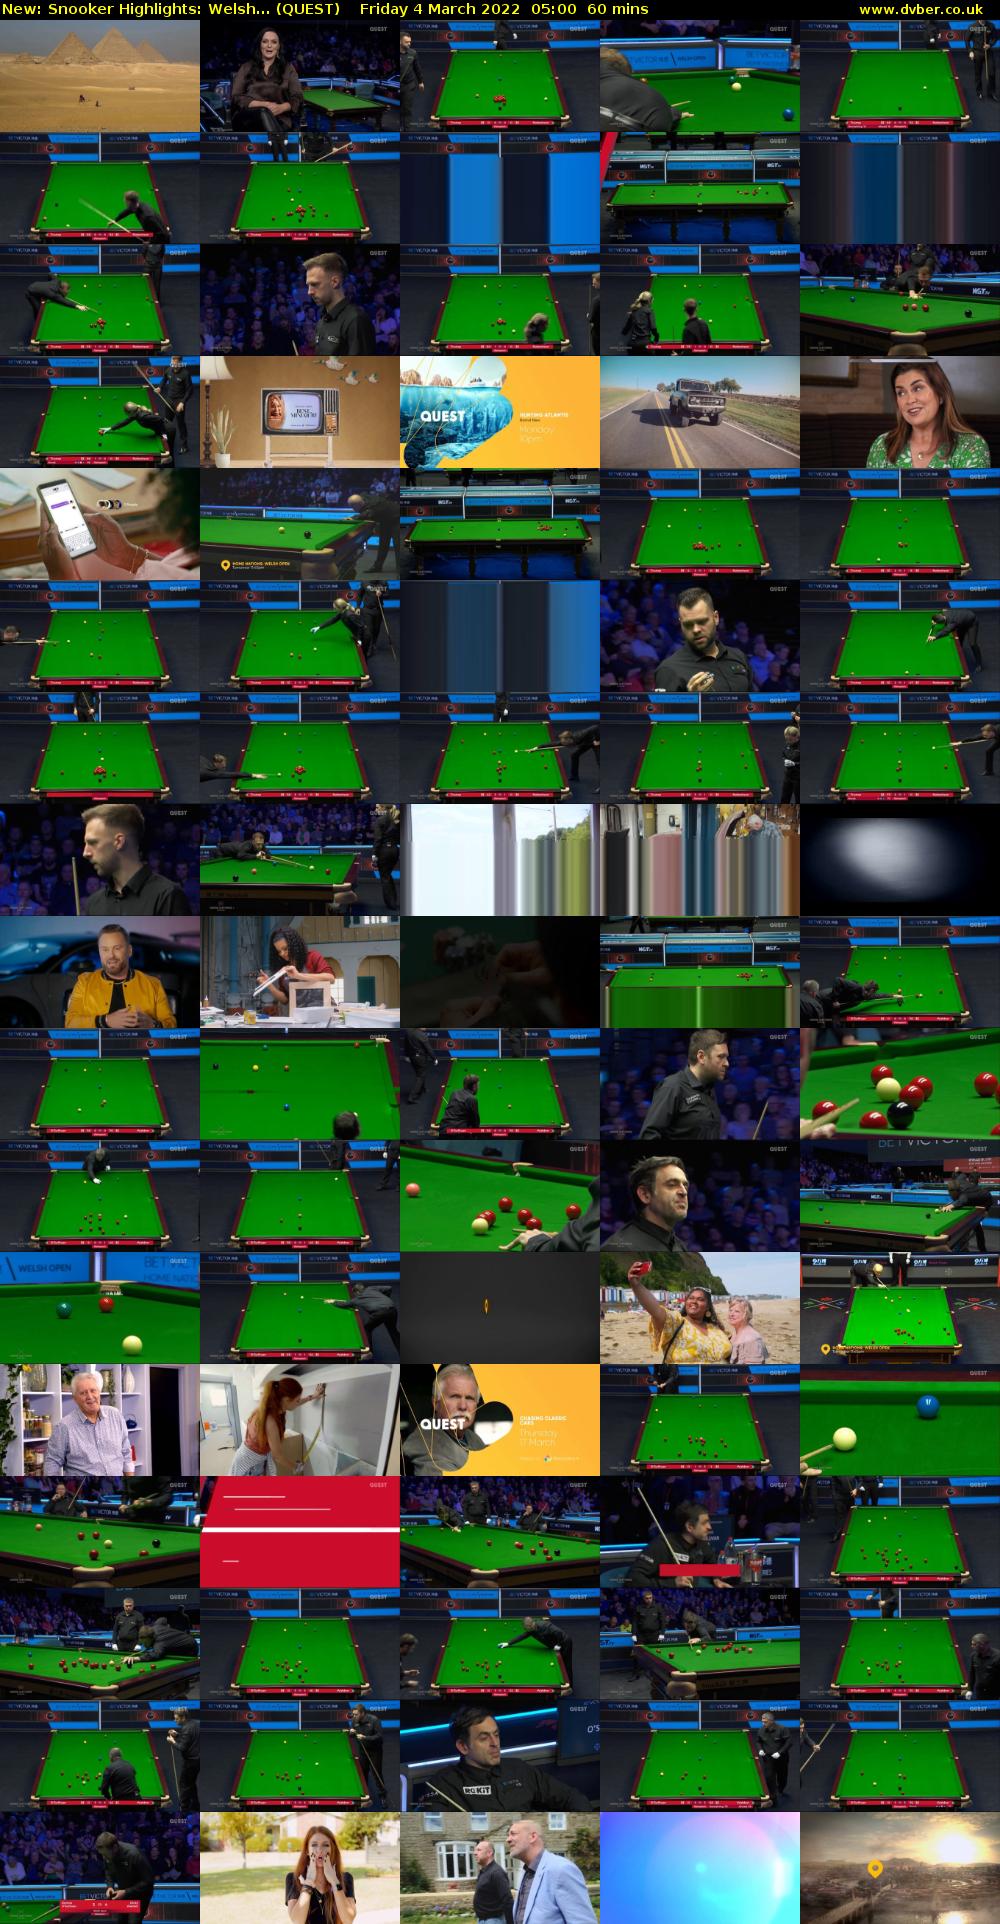 Snooker Highlights: Welsh... (QUEST) Friday 4 March 2022 05:00 - 06:00